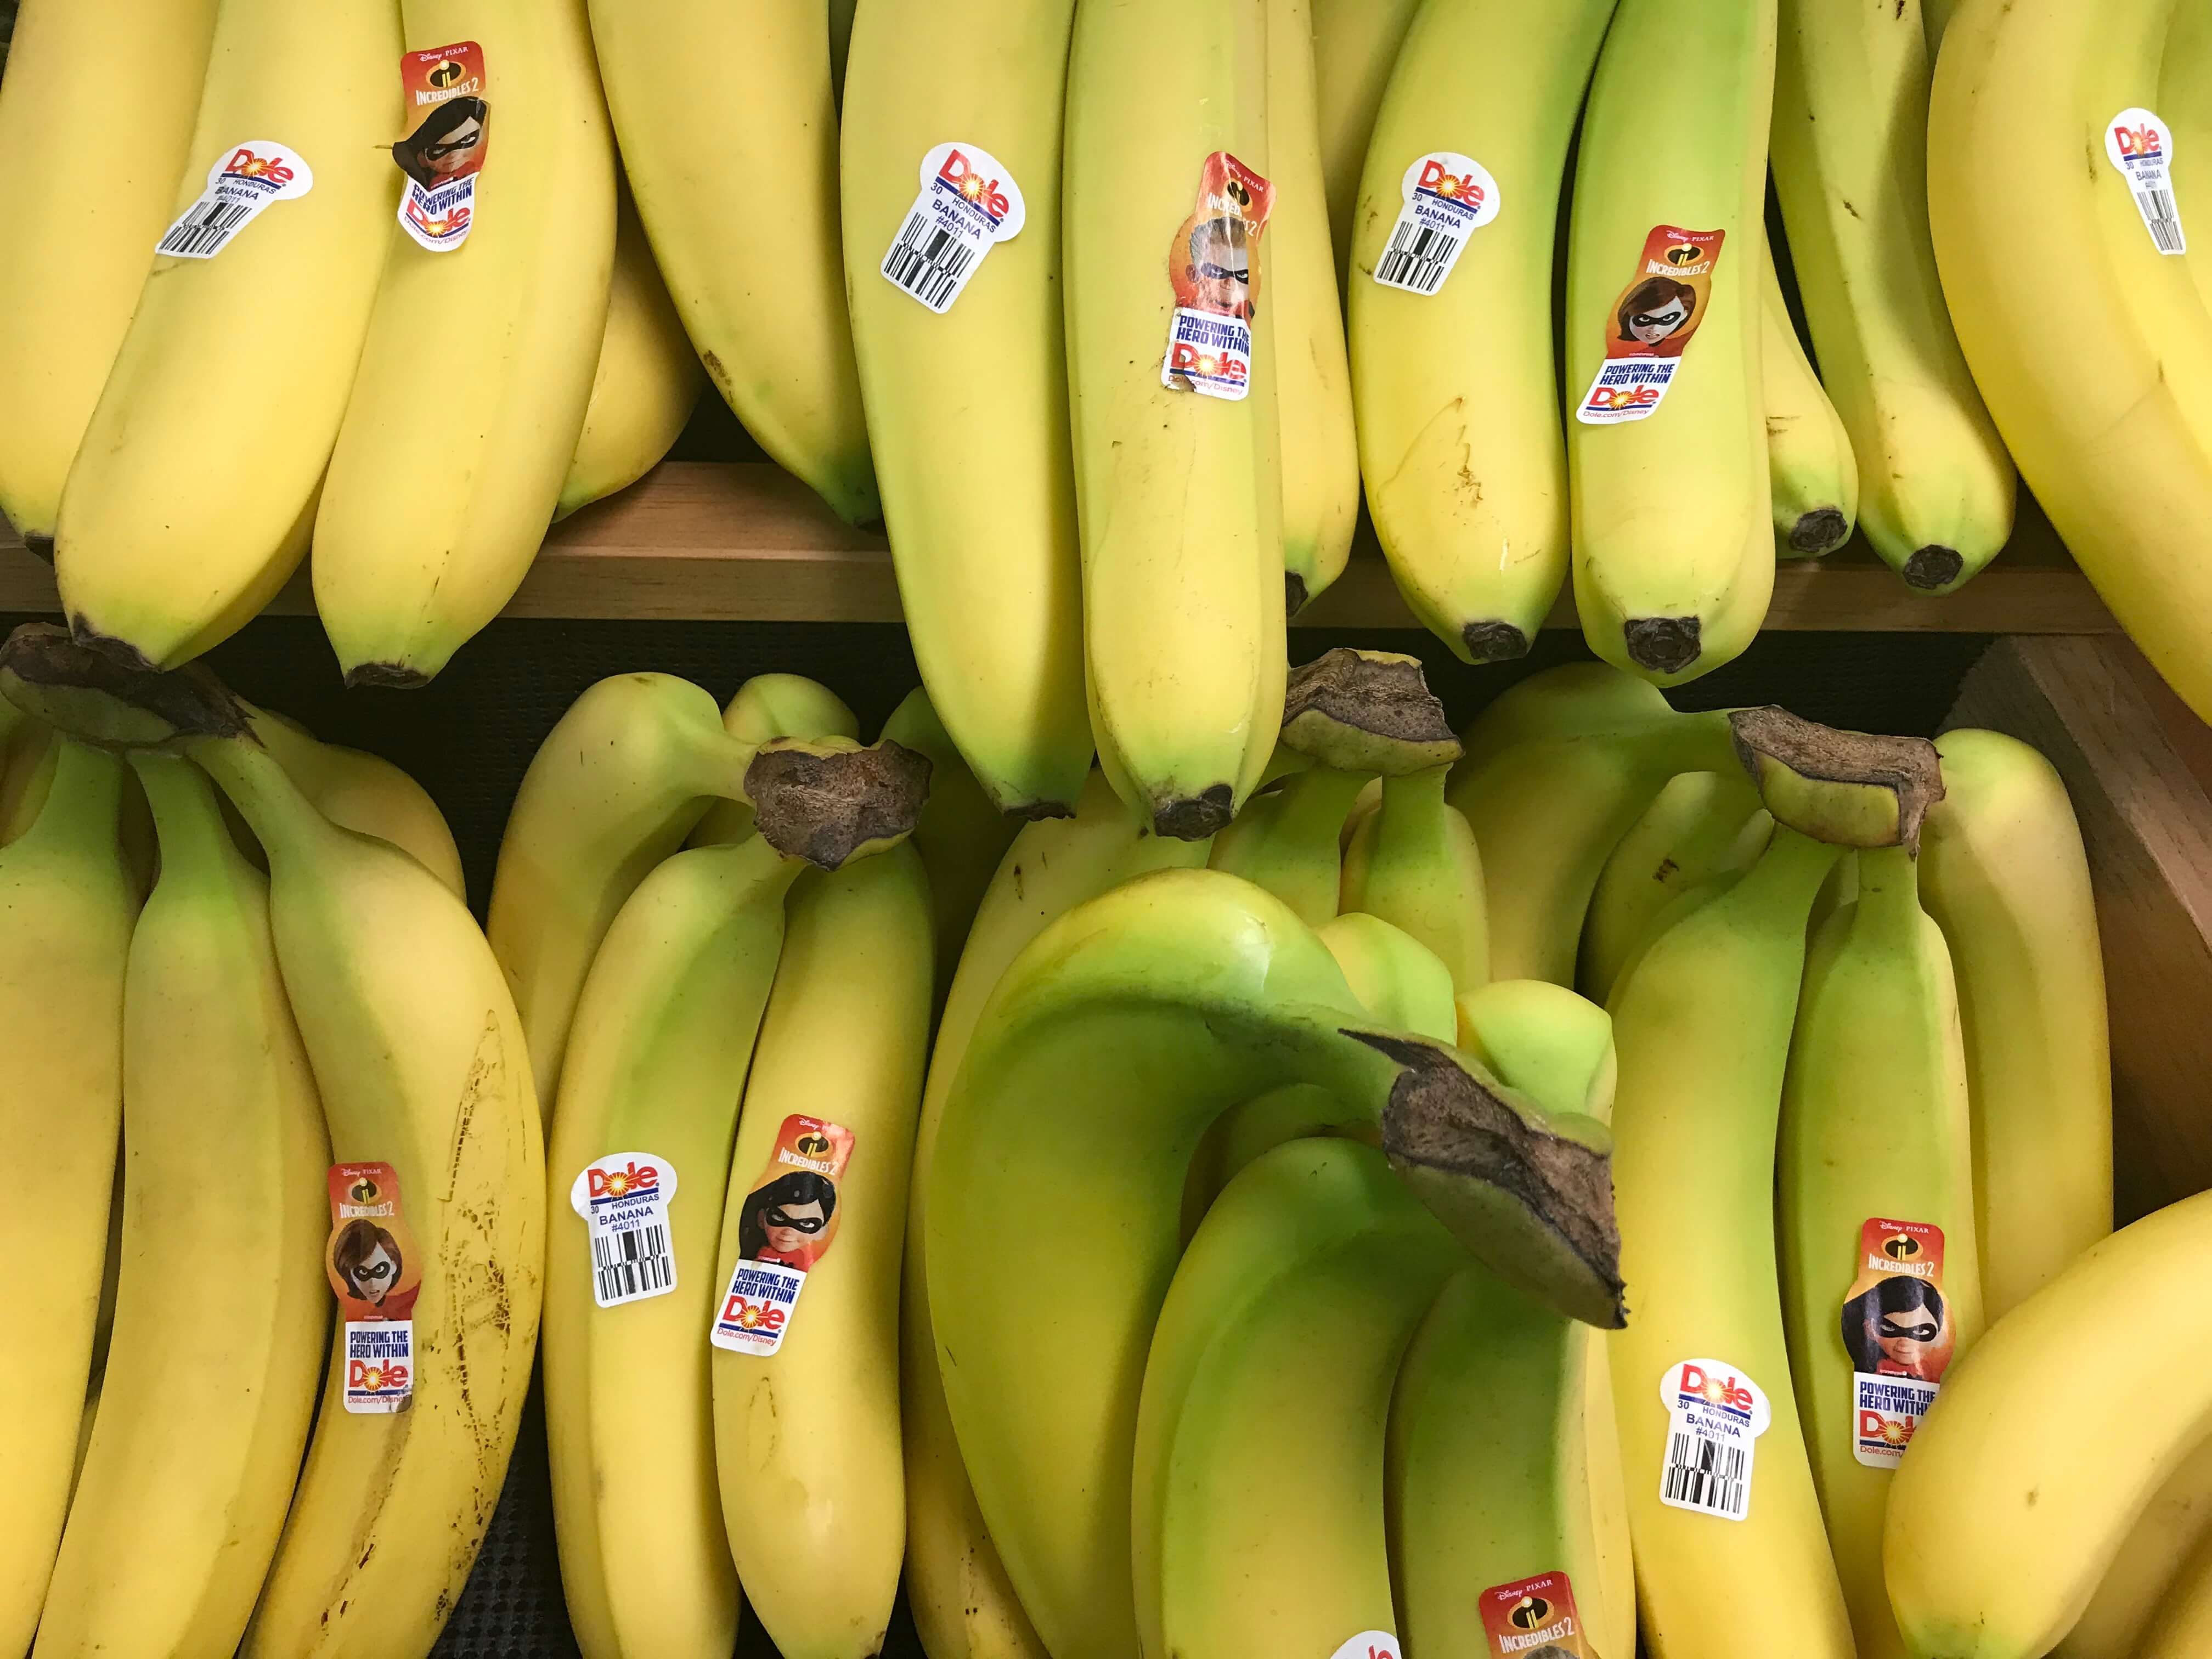 Local Bananas Grown in PA and Sold at The Markets